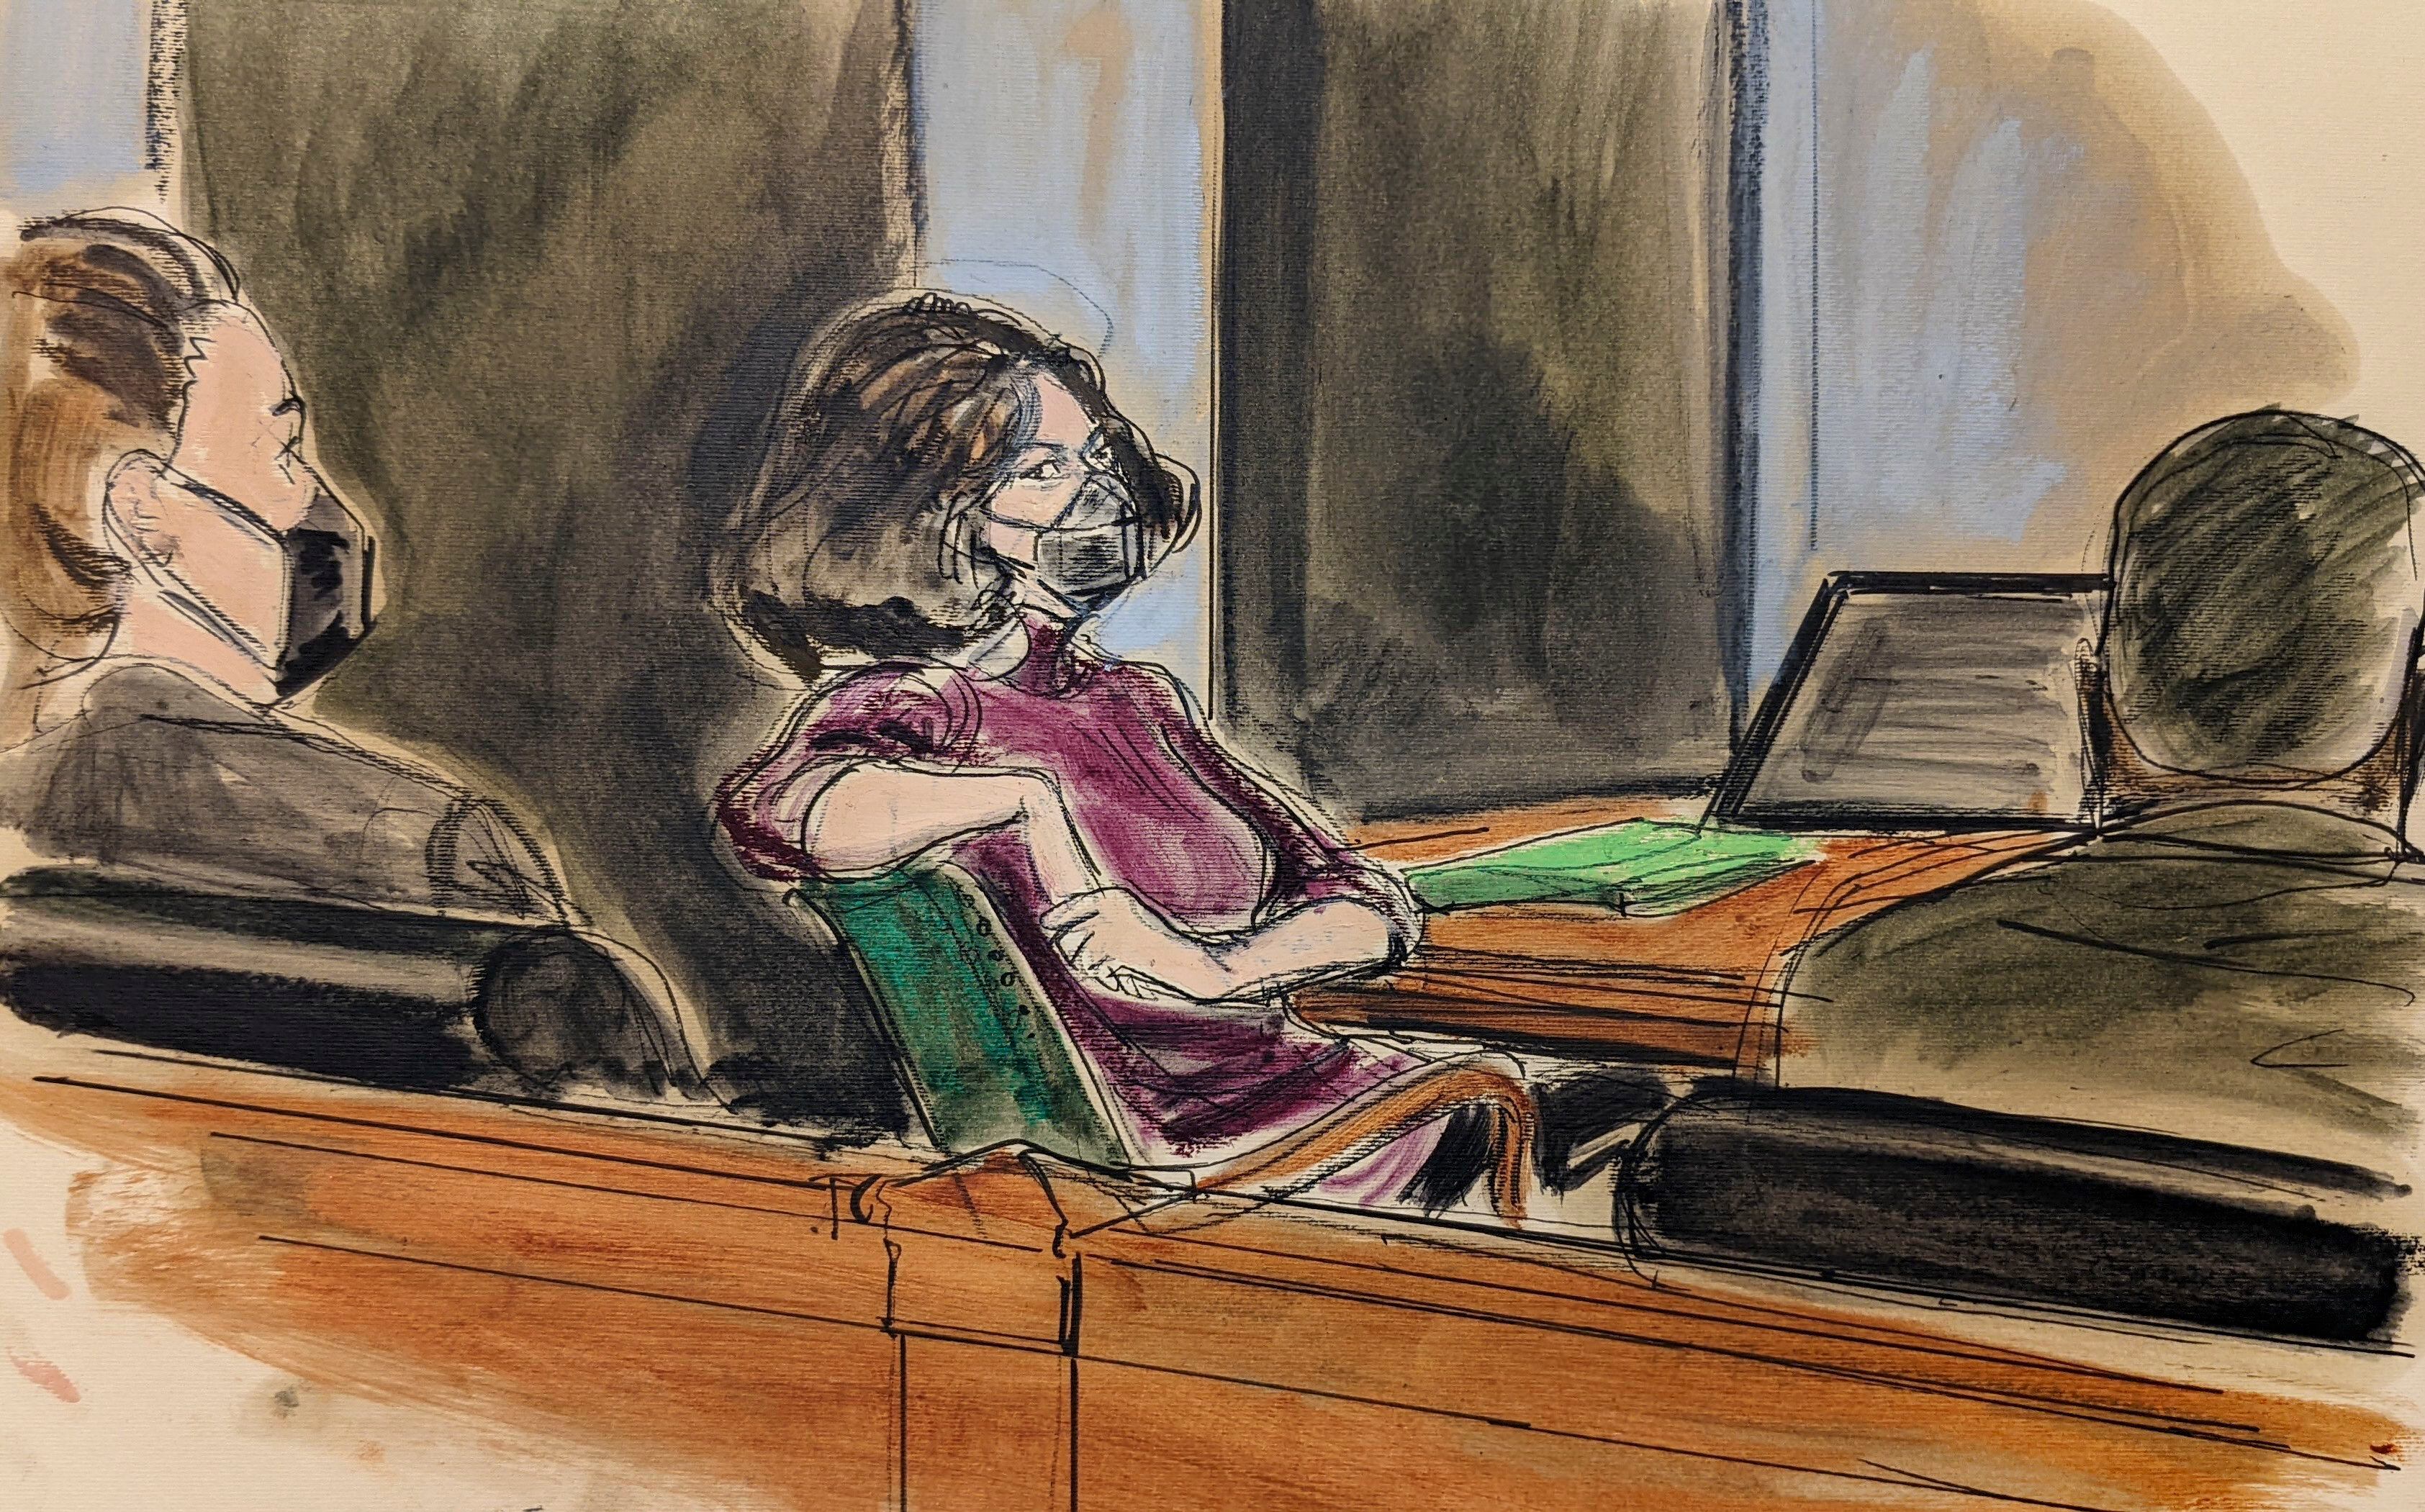 ‘Substitute camera’ sketches Ghislaine Maxwell trial beats